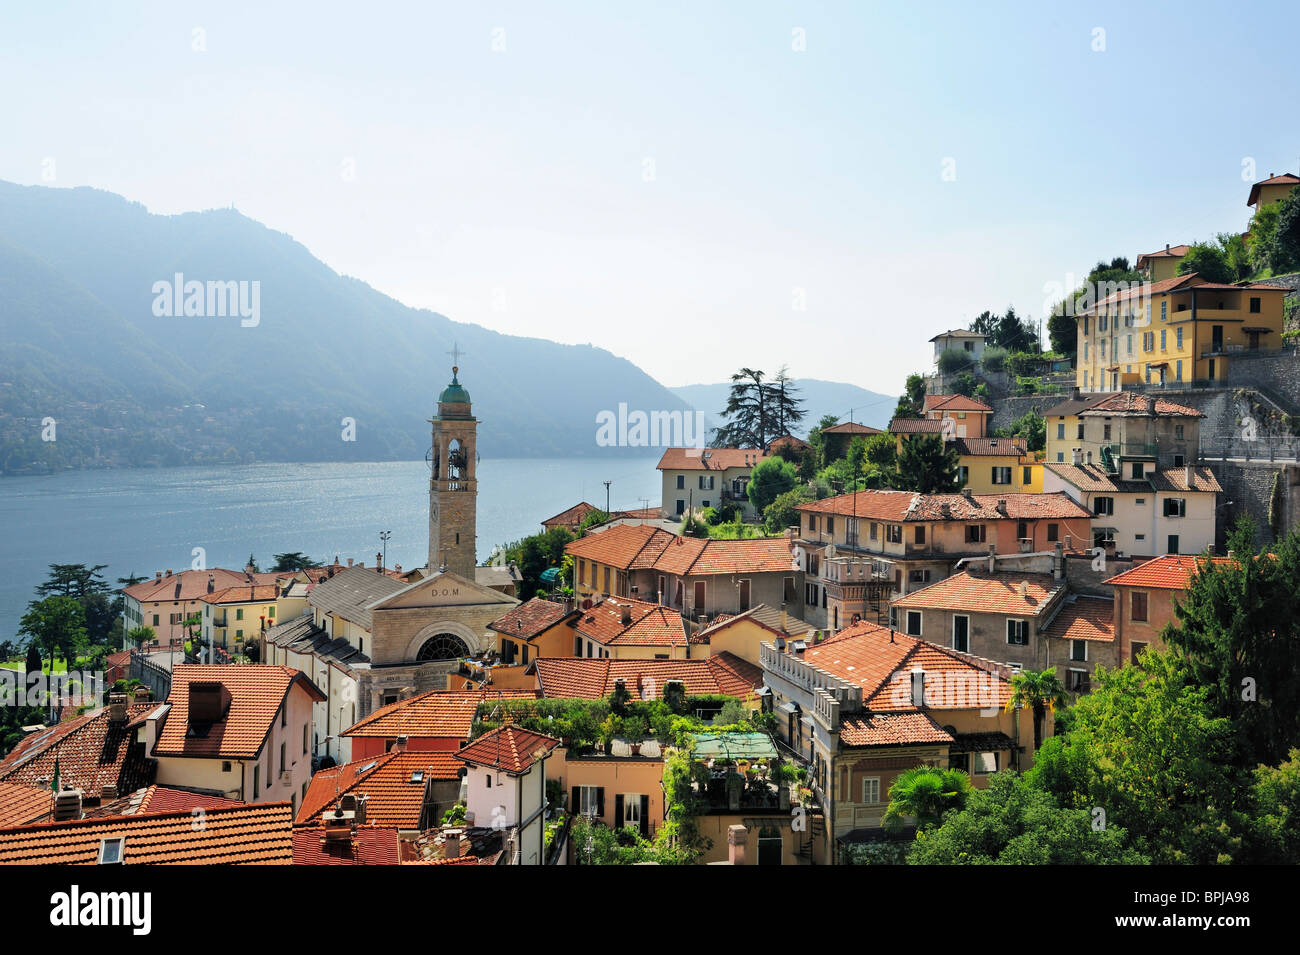 Village at western bank of Lake Como, Lombardy, Italy Stock Photo